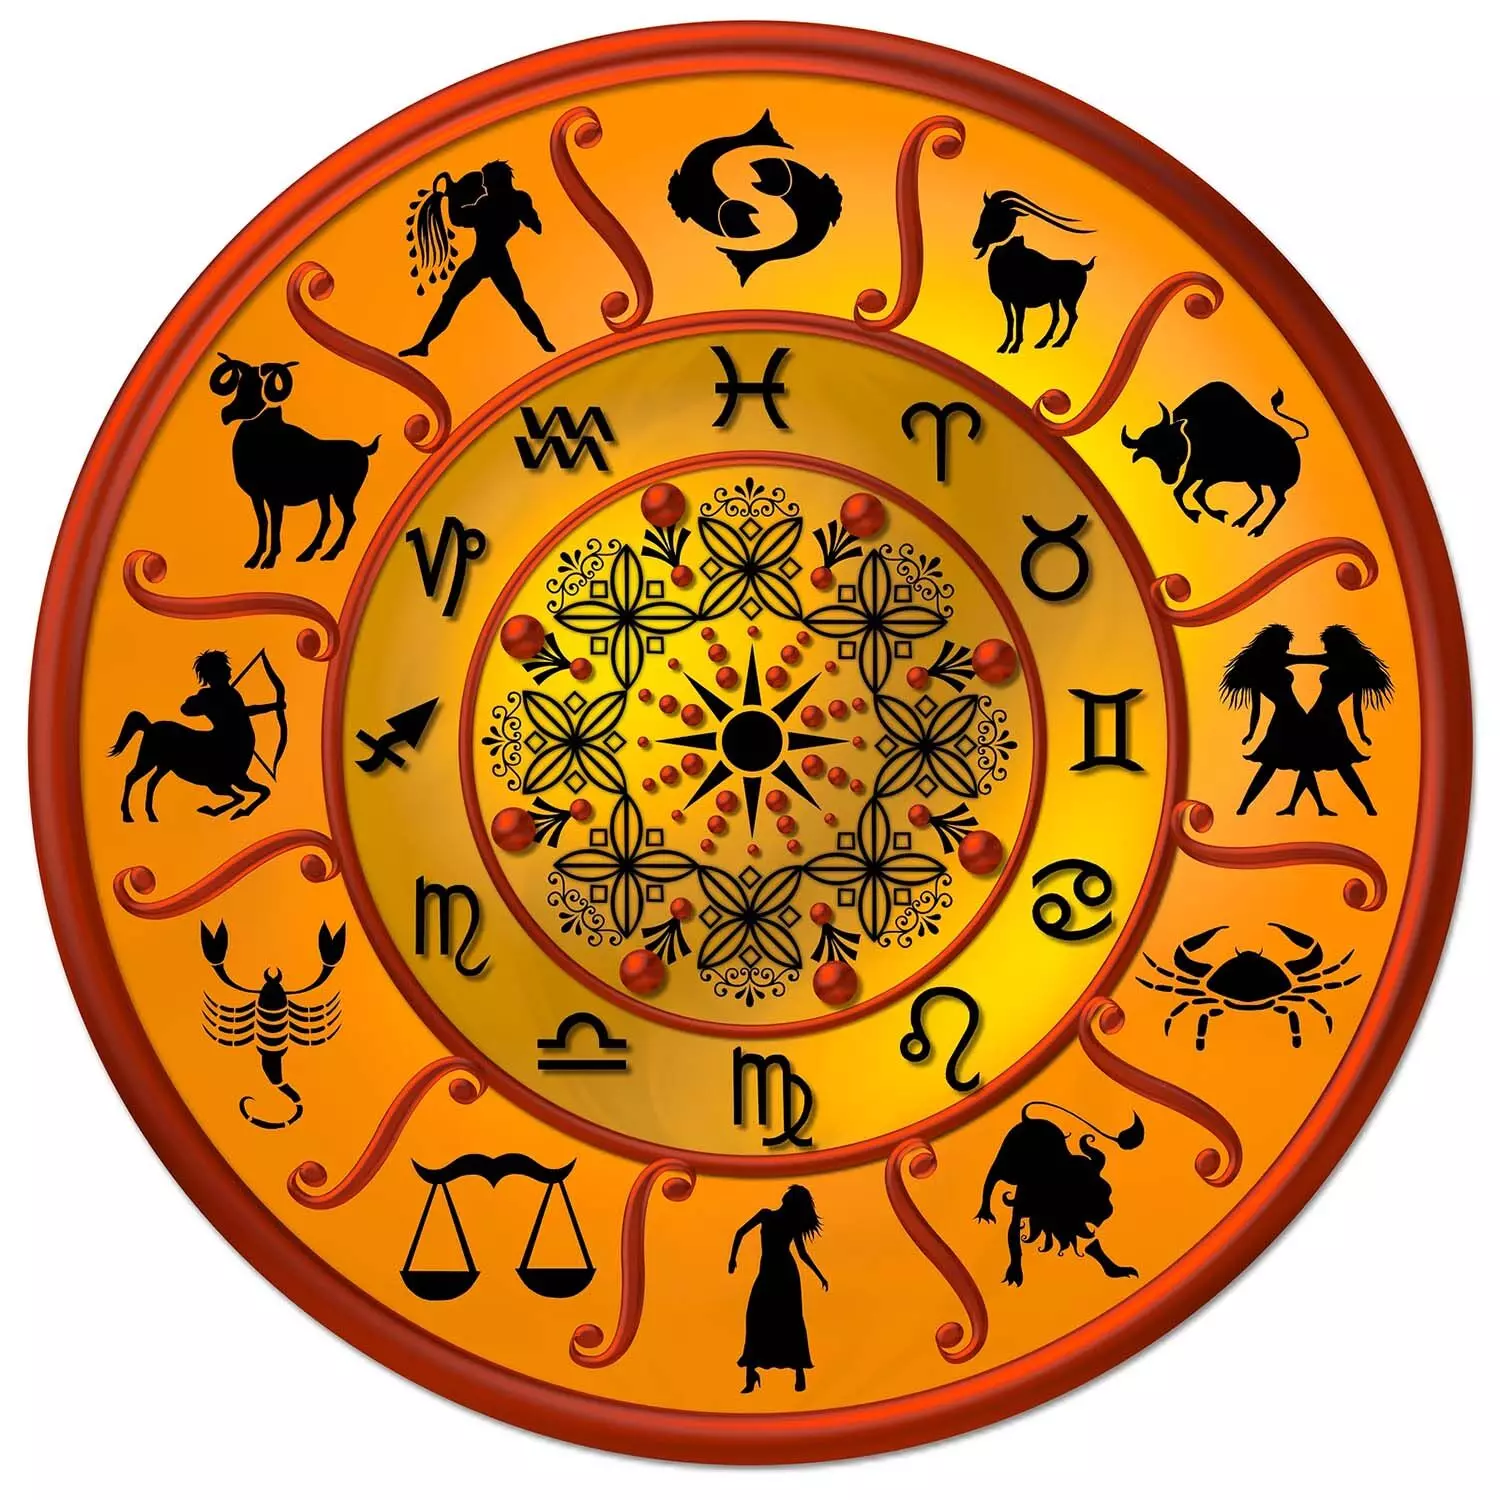 18 June – Know your todays horoscope